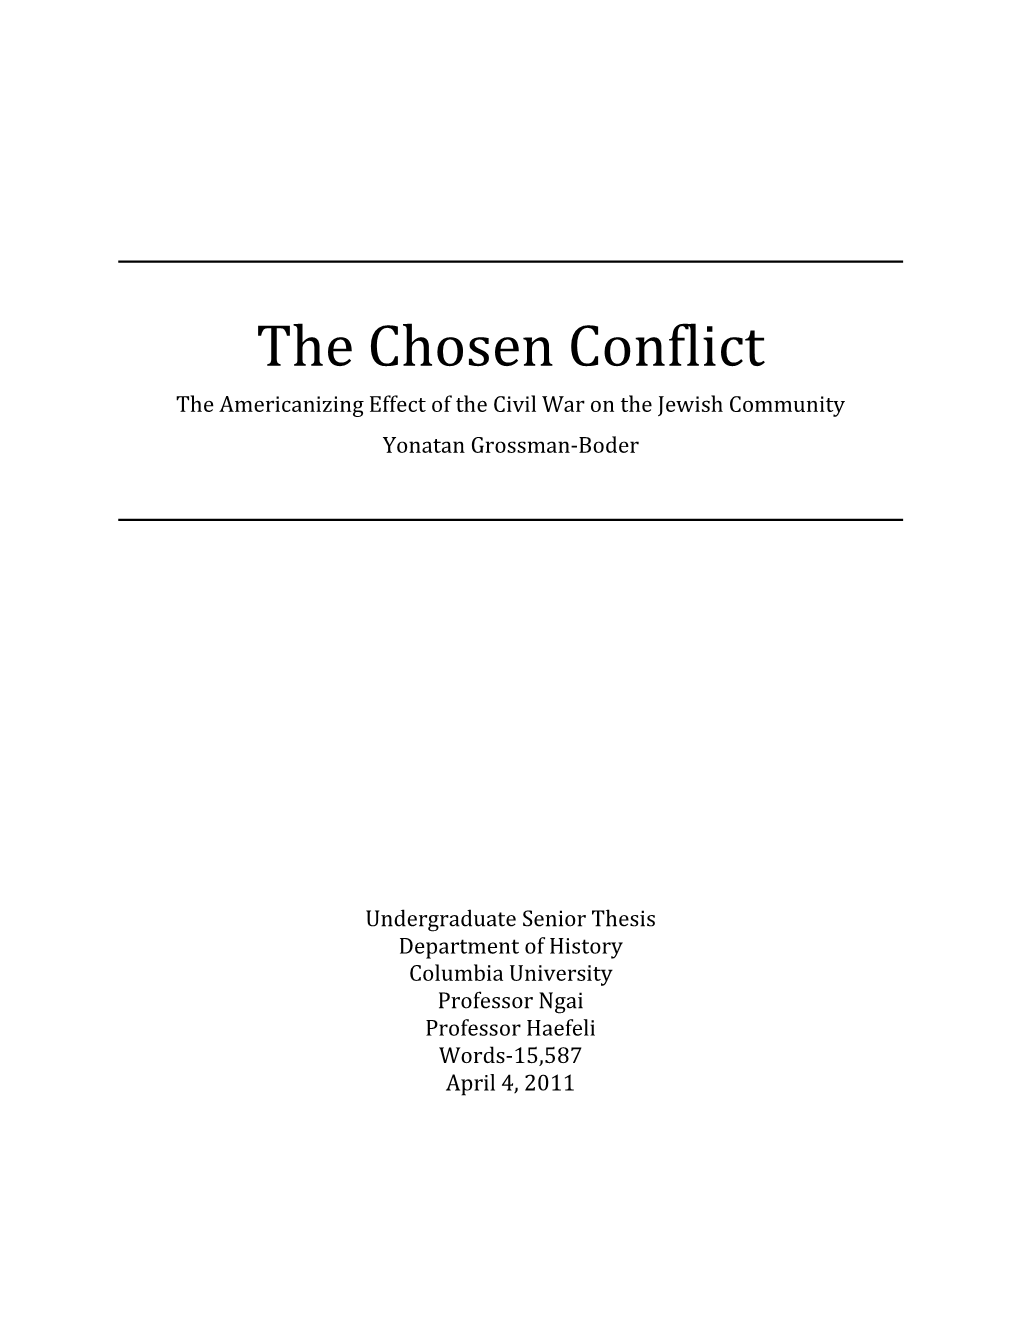 The Chosen Conflict the Americanizing Effect of the Civil War on the Jewish Community Yonatan Grossman-Boder